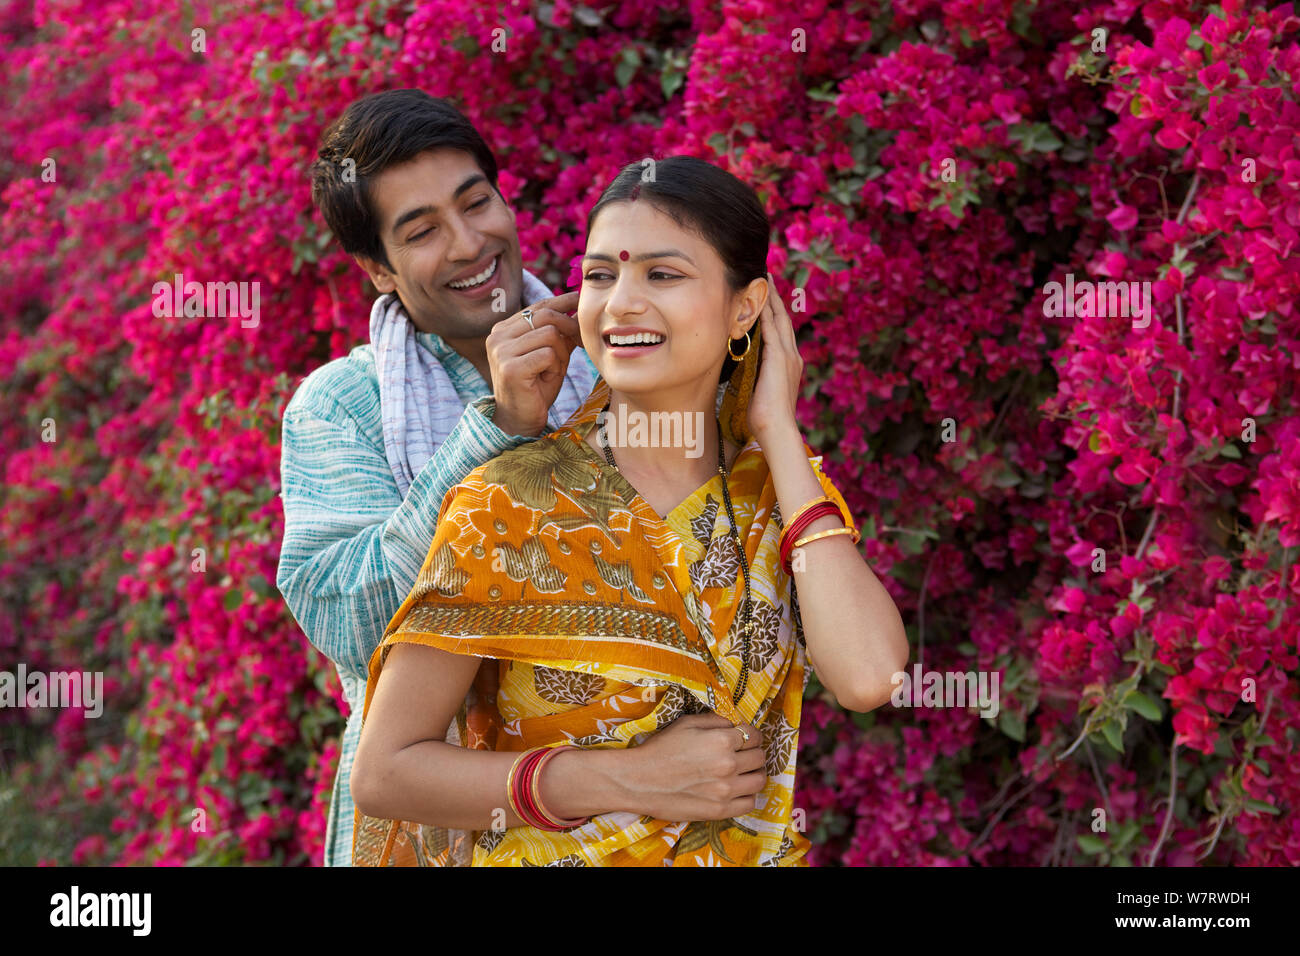 Rural man putting flower in his wife's hair Stock Photo - Alamy